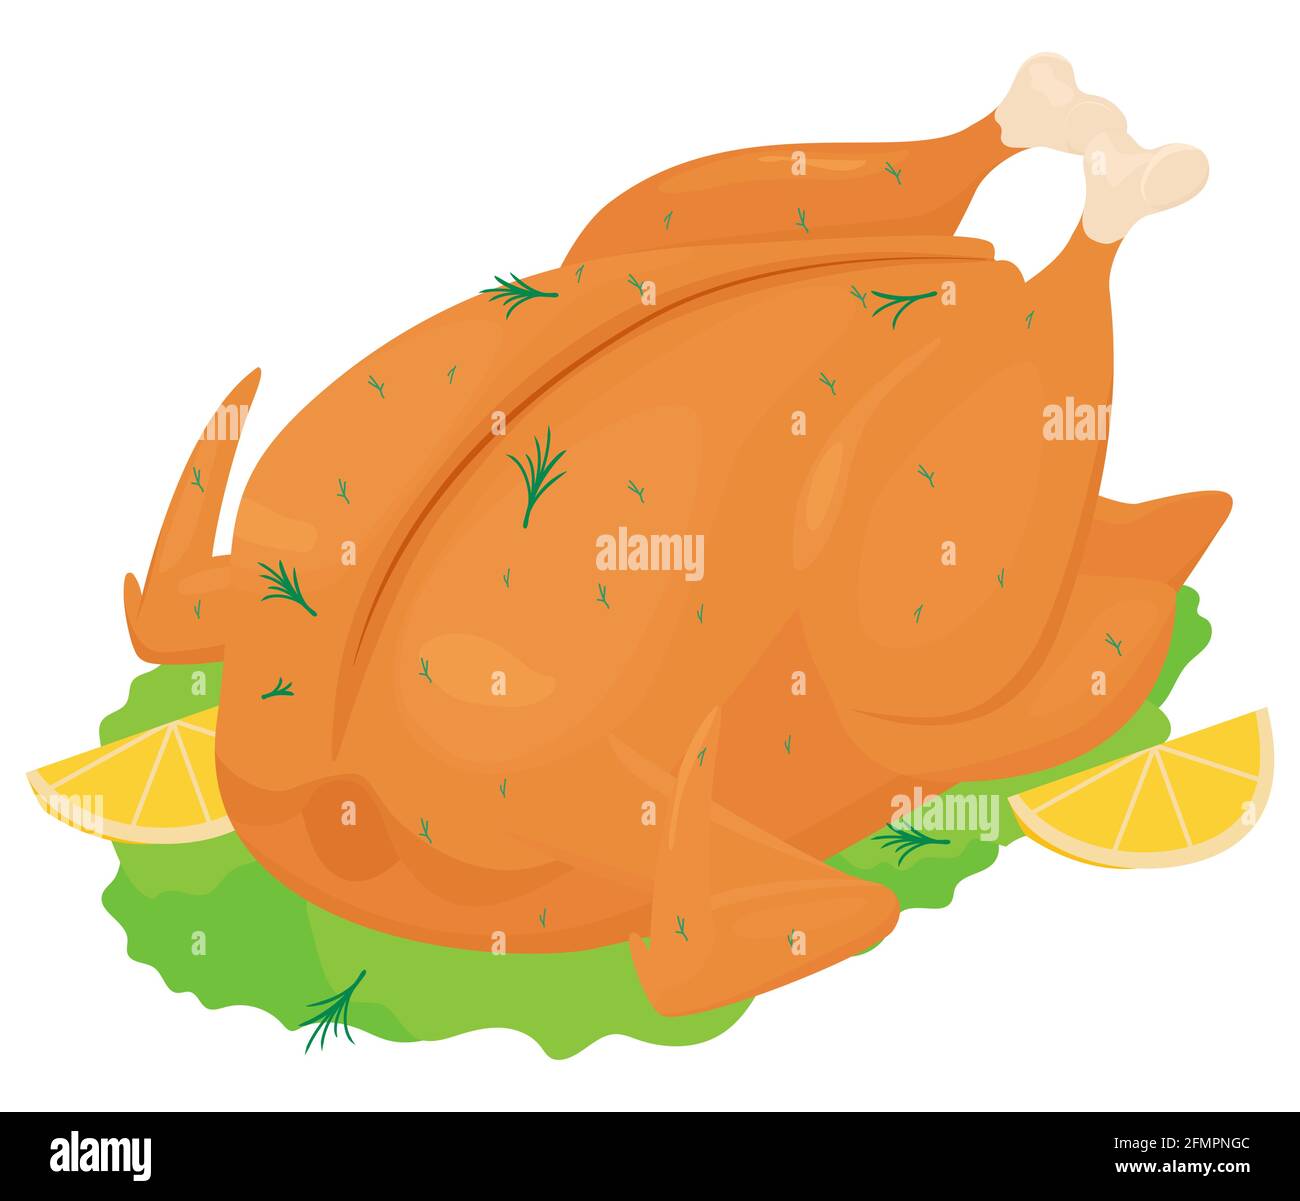 Whole stuffed fried, roasted chicken with orange crispy crust, cartoon vector illustration isolated on white background. Delicious meat dish with seas Stock Vector